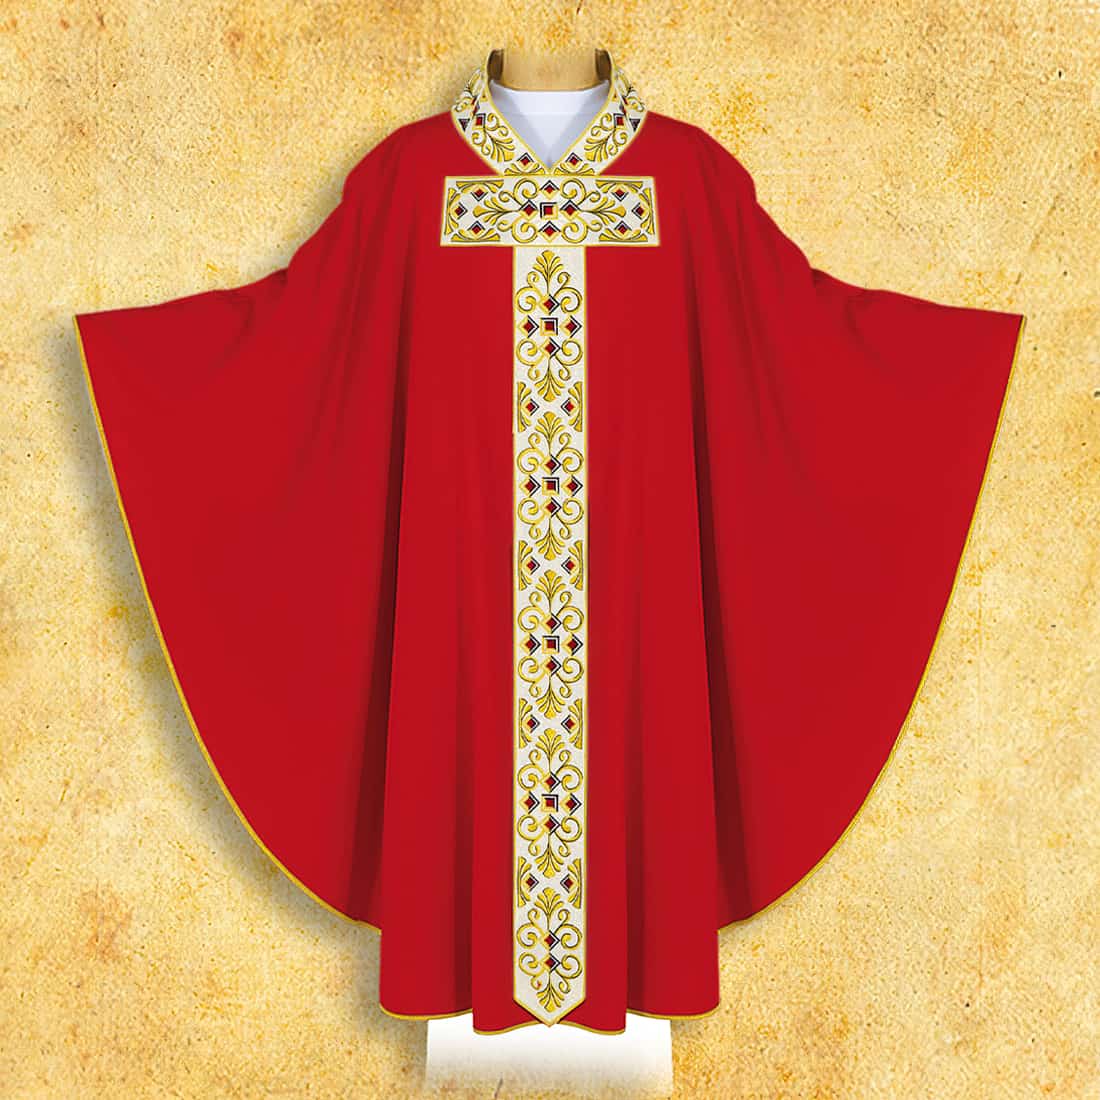 Embroidered chasuble "TE DEUM"